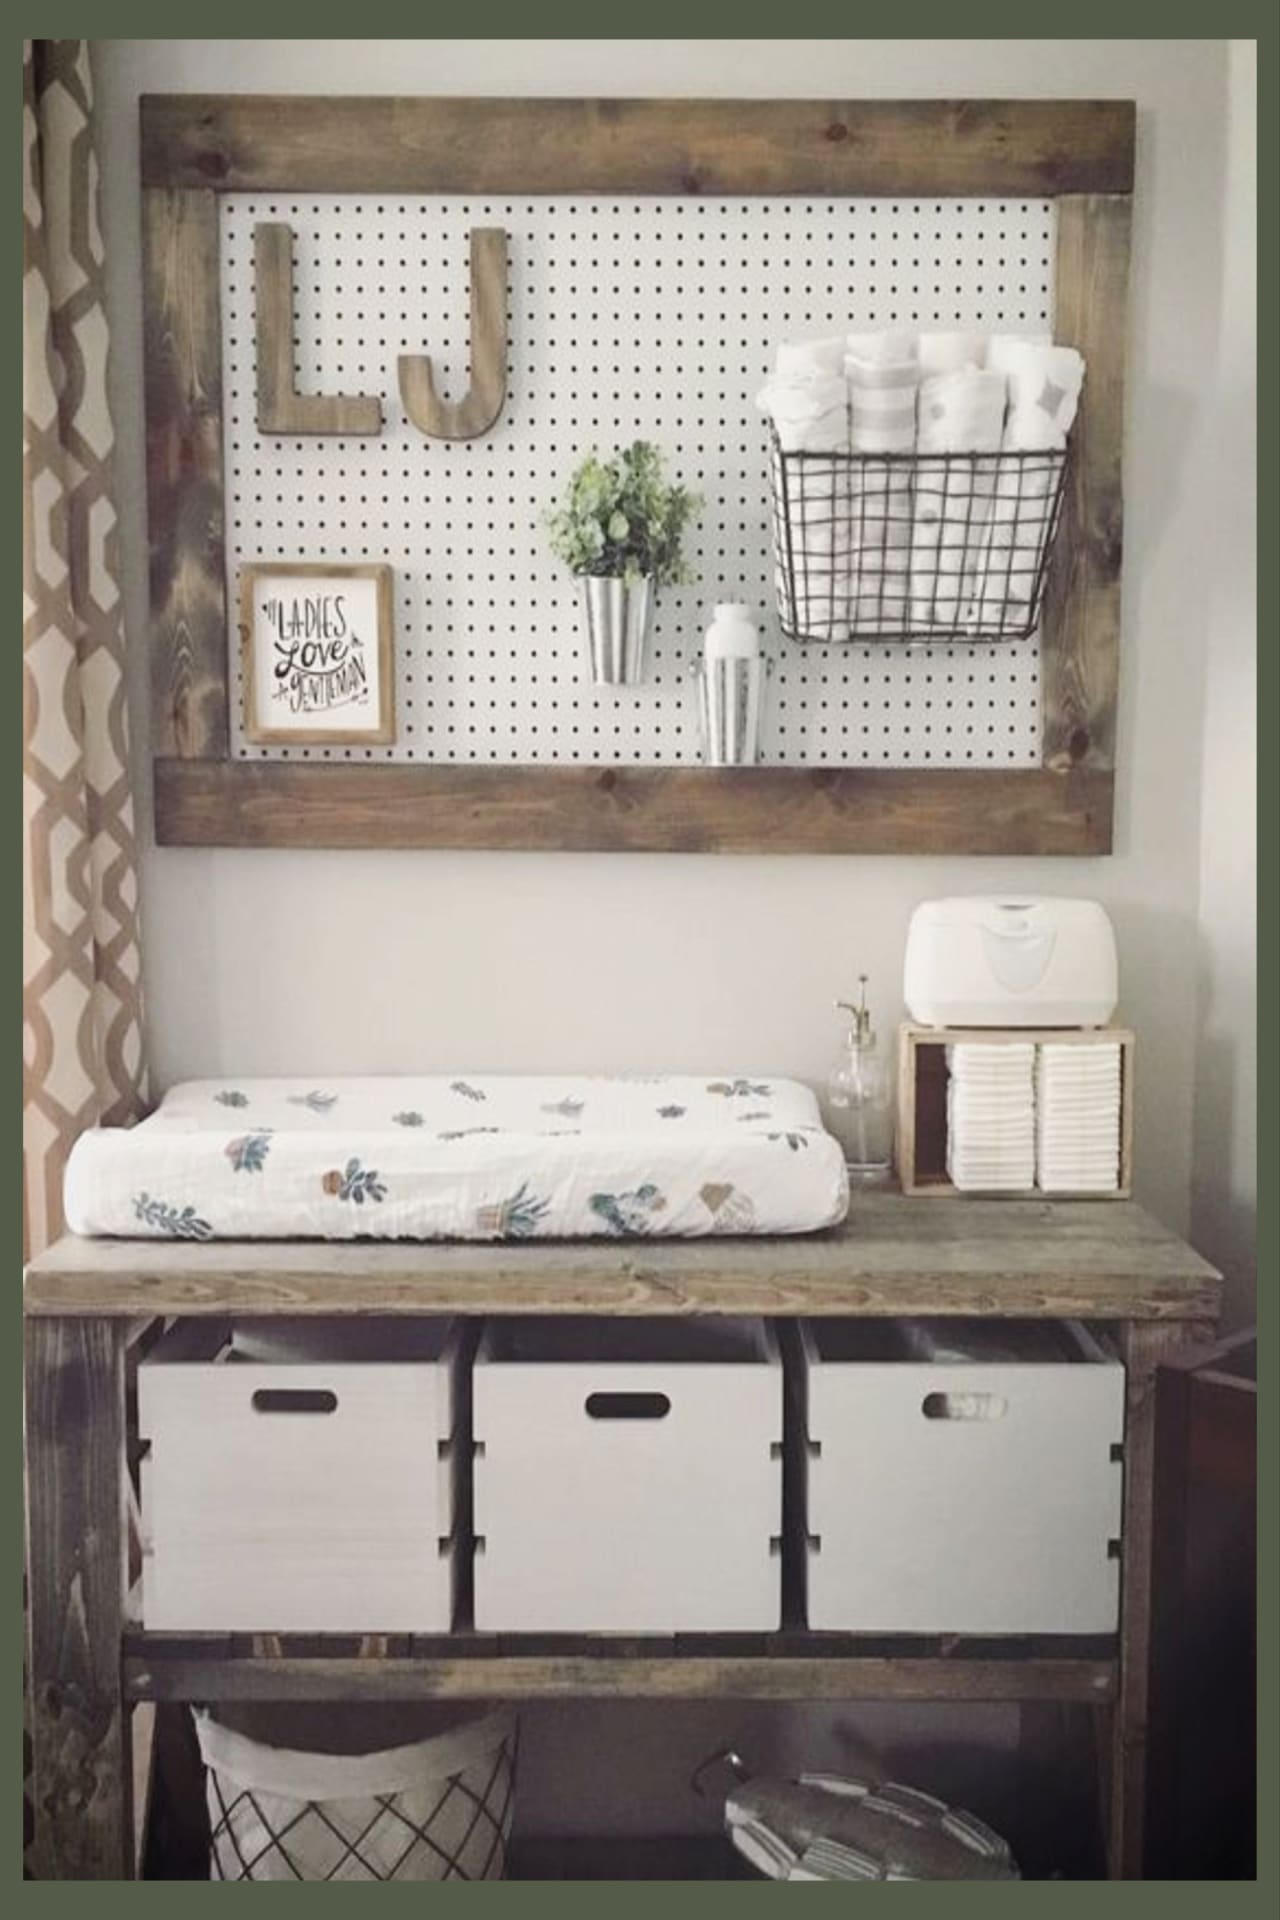 Baby boy rustic nursery ideas - rustic nursery changing table and accent wall decor ideas